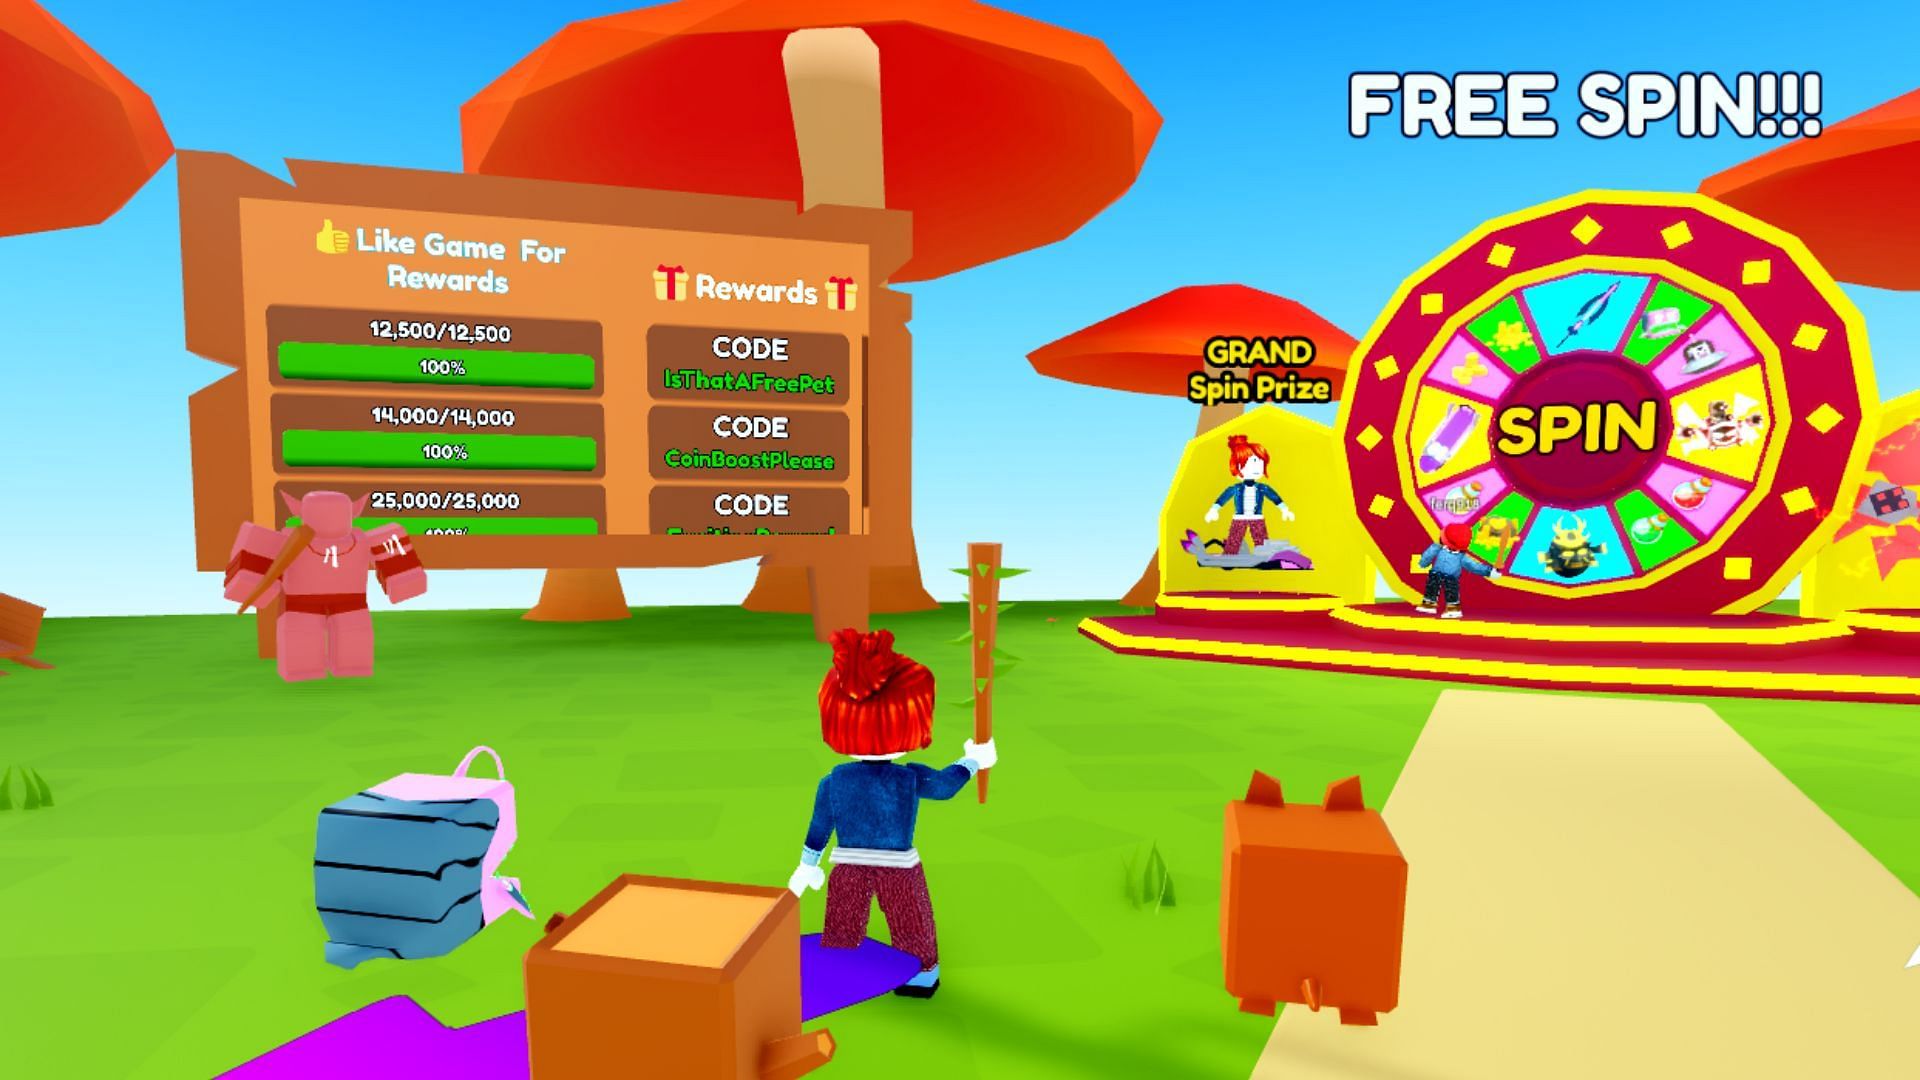 Free Spin &amp; Rewards in Weapon Crafting Simulator (Image via Roblox)